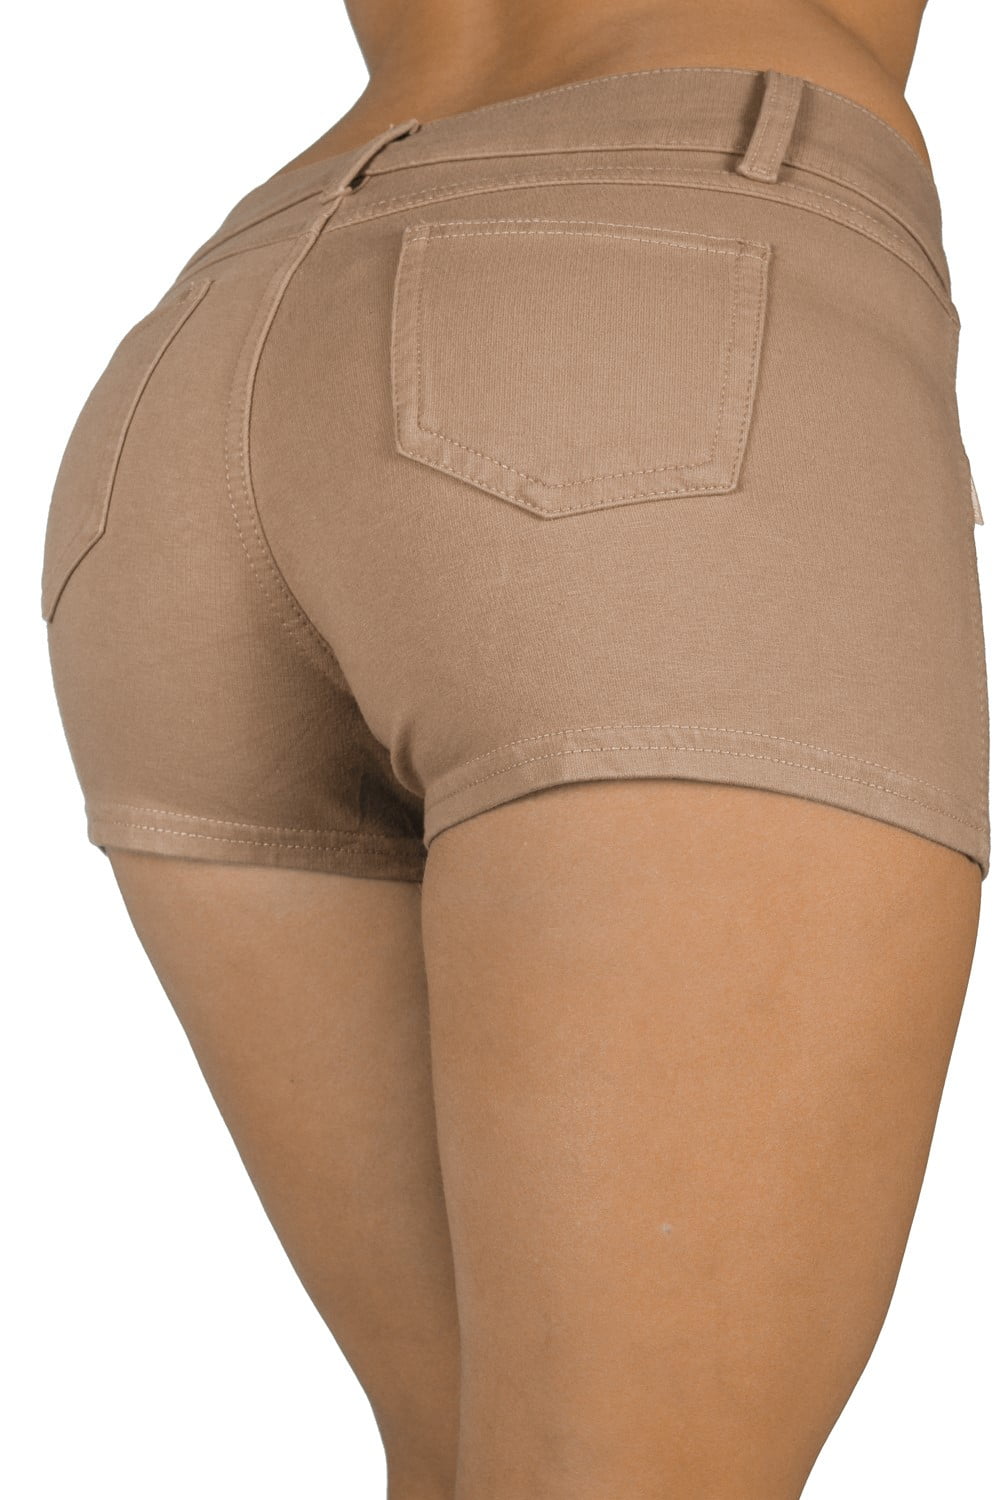 Basic Booty Shorts Premium Stretch French Terry with Gentle Butt Lift Stitching 